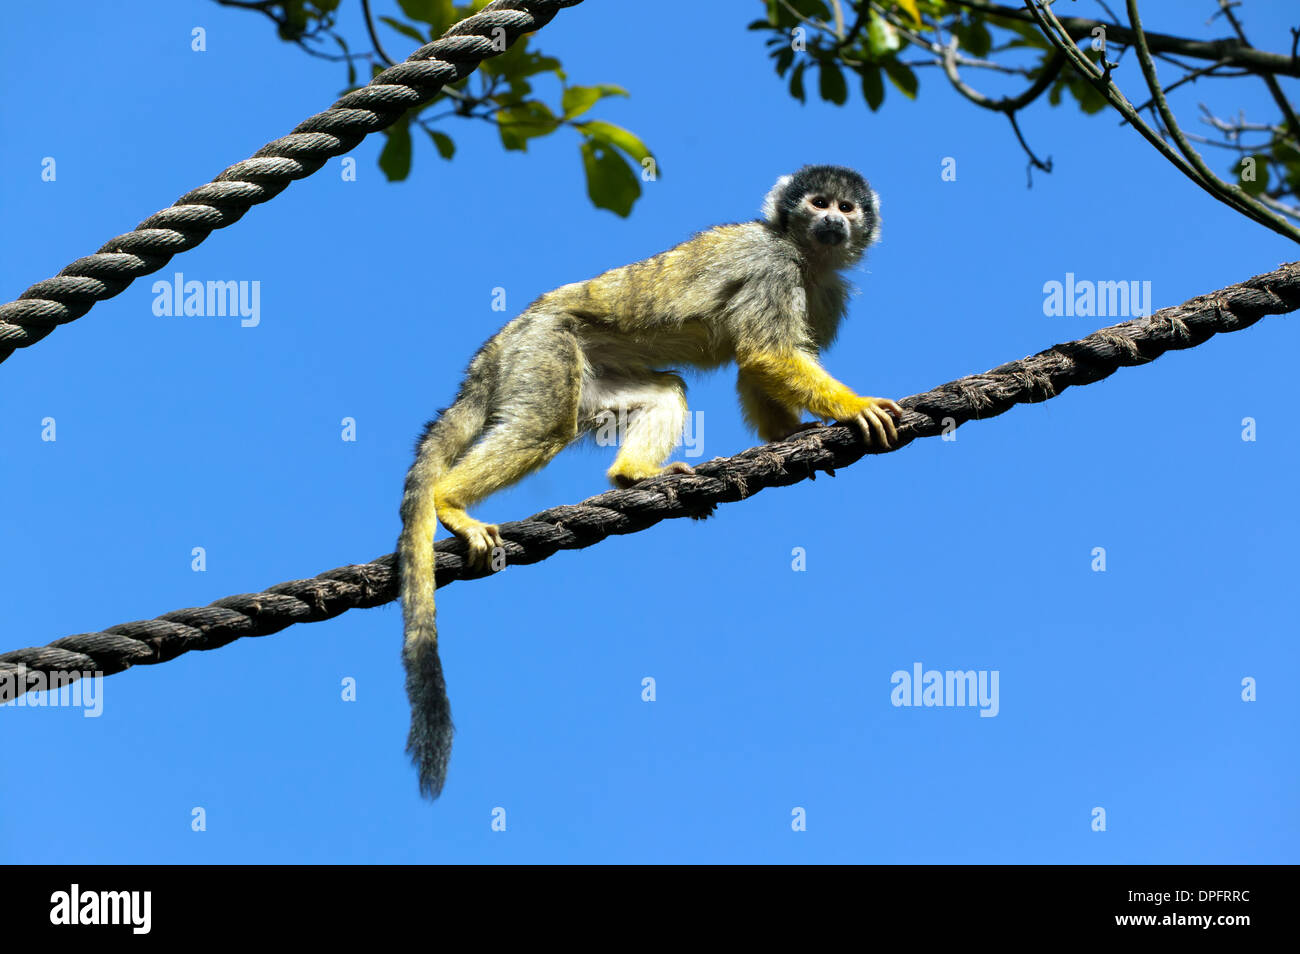 Image of a black-capped squirrel monkey (Saimiri boliviensis), walking along a rope Stock Photo